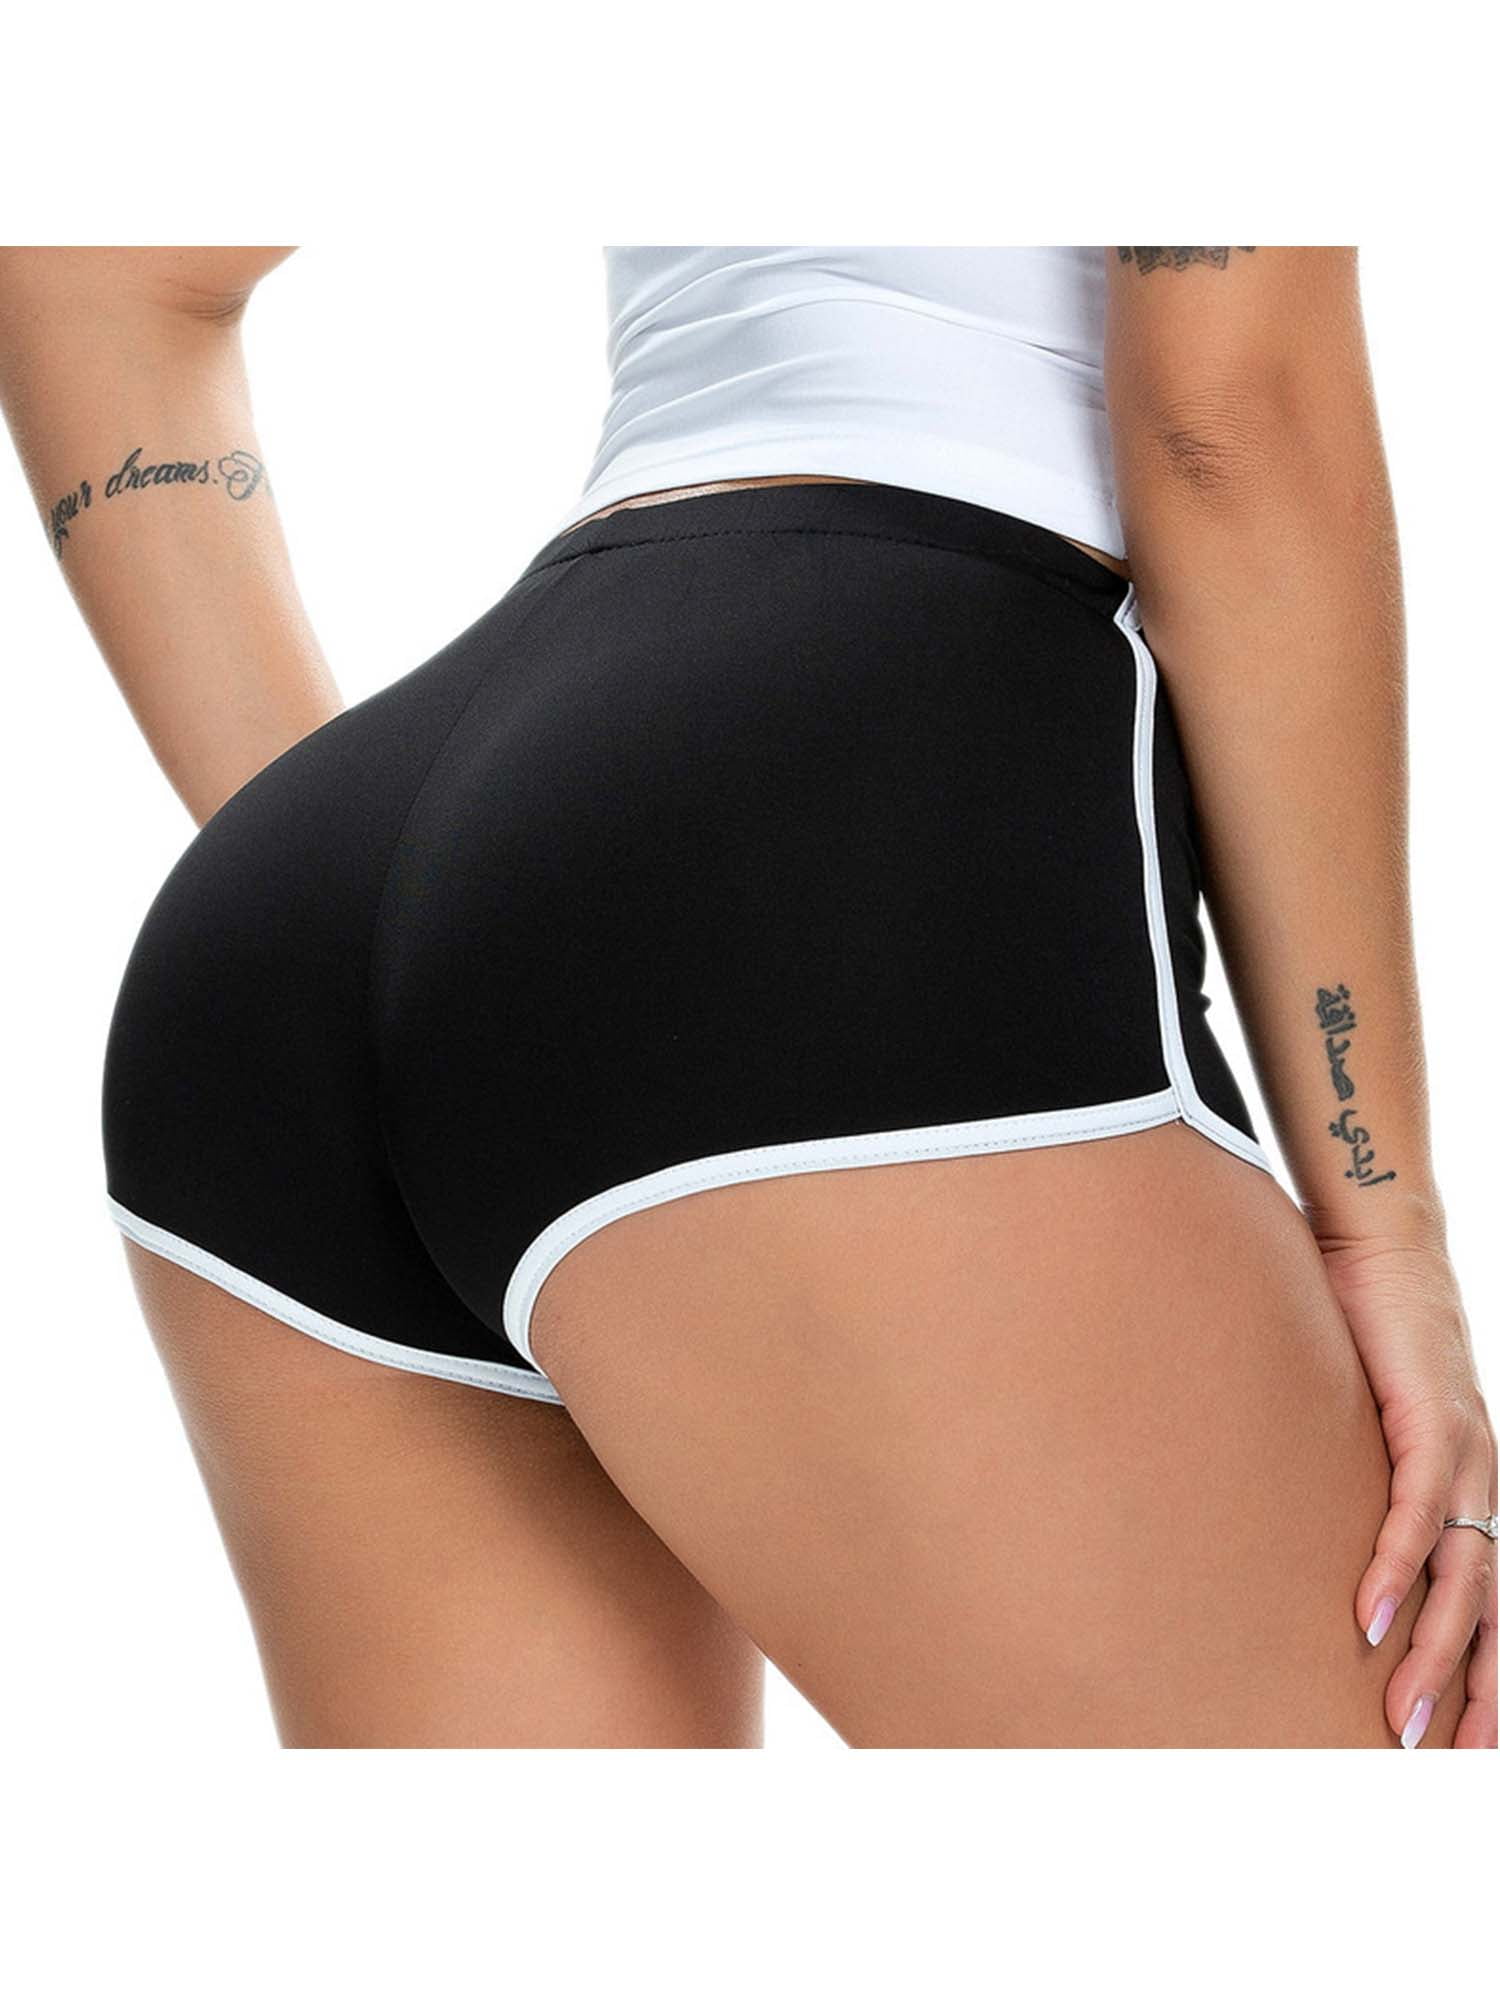 Yoga Shorts for Women,High Waisted Solid Booty Shorts Button Pockets Hot Pants